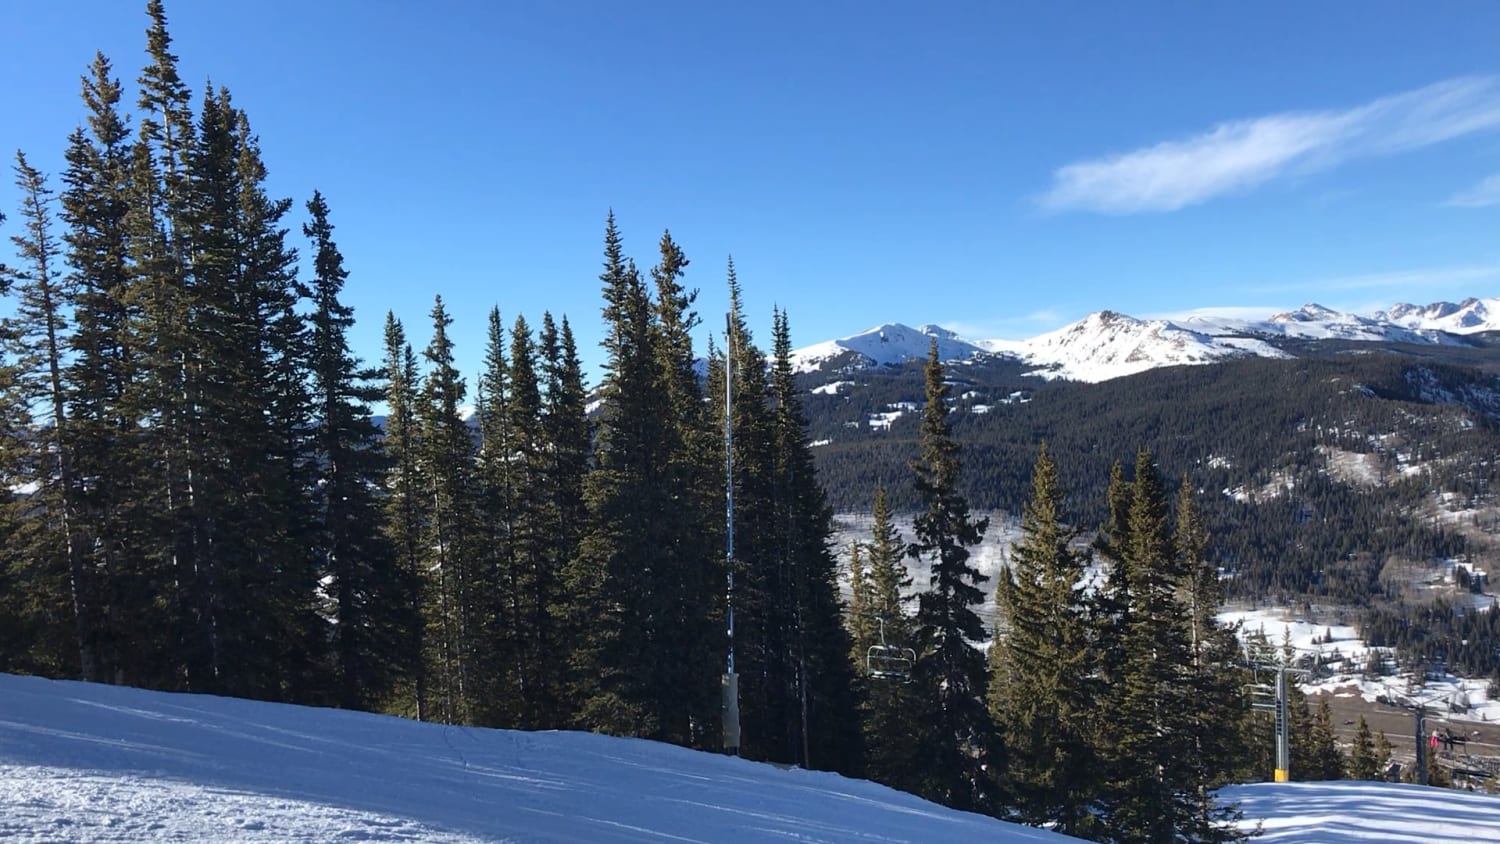 It’s real hard to be depressed when you’re skiing.